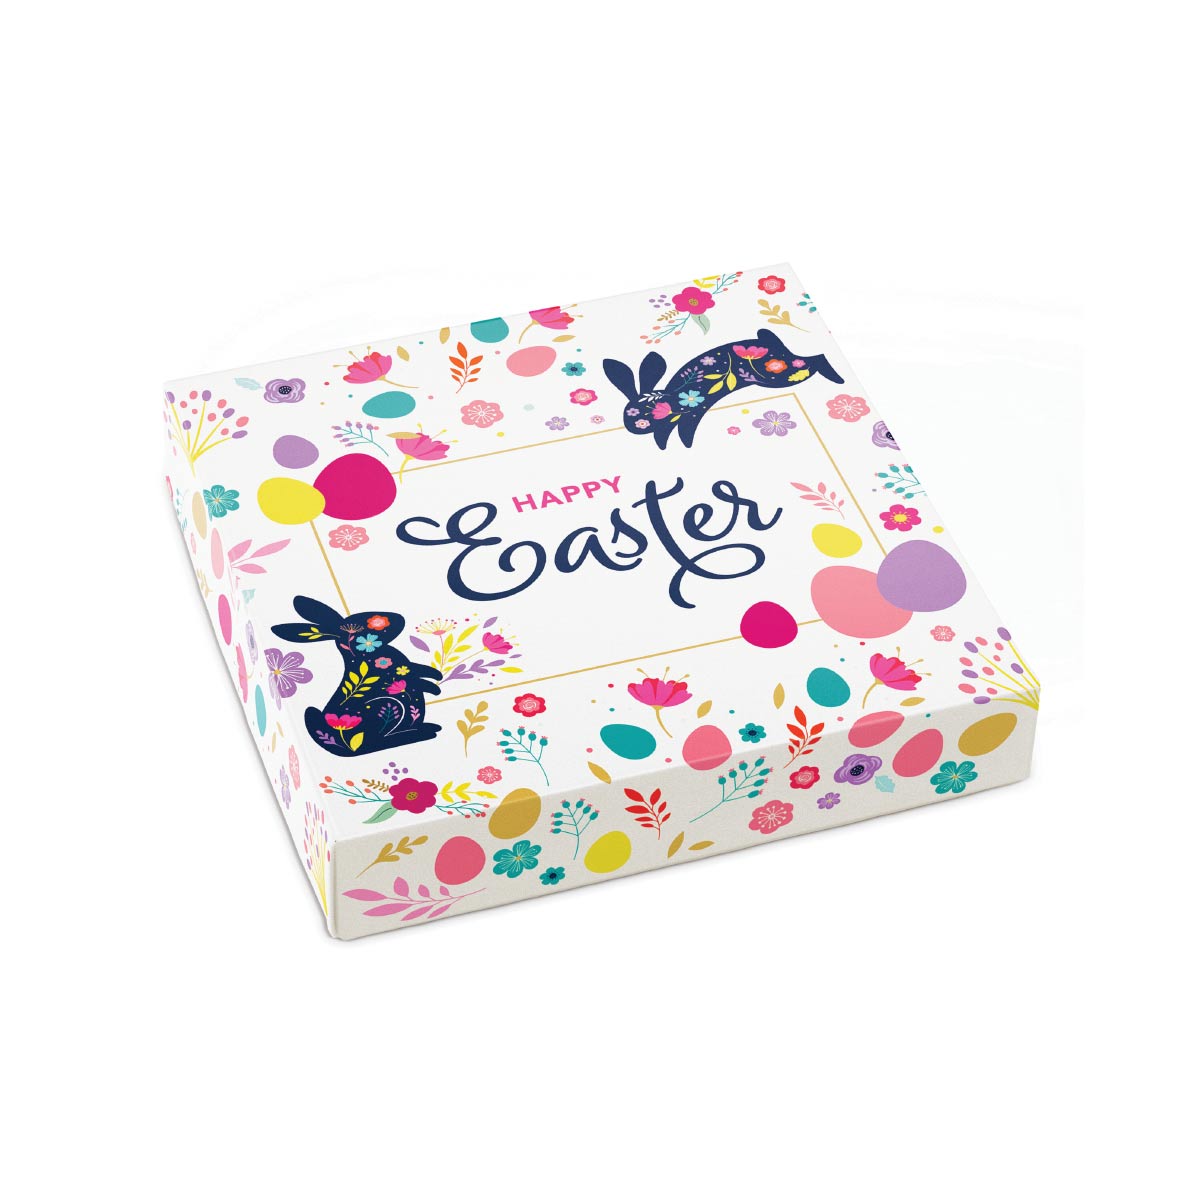 Happy Easter Themed Box Cover for 16 Piece Holiday Assortment